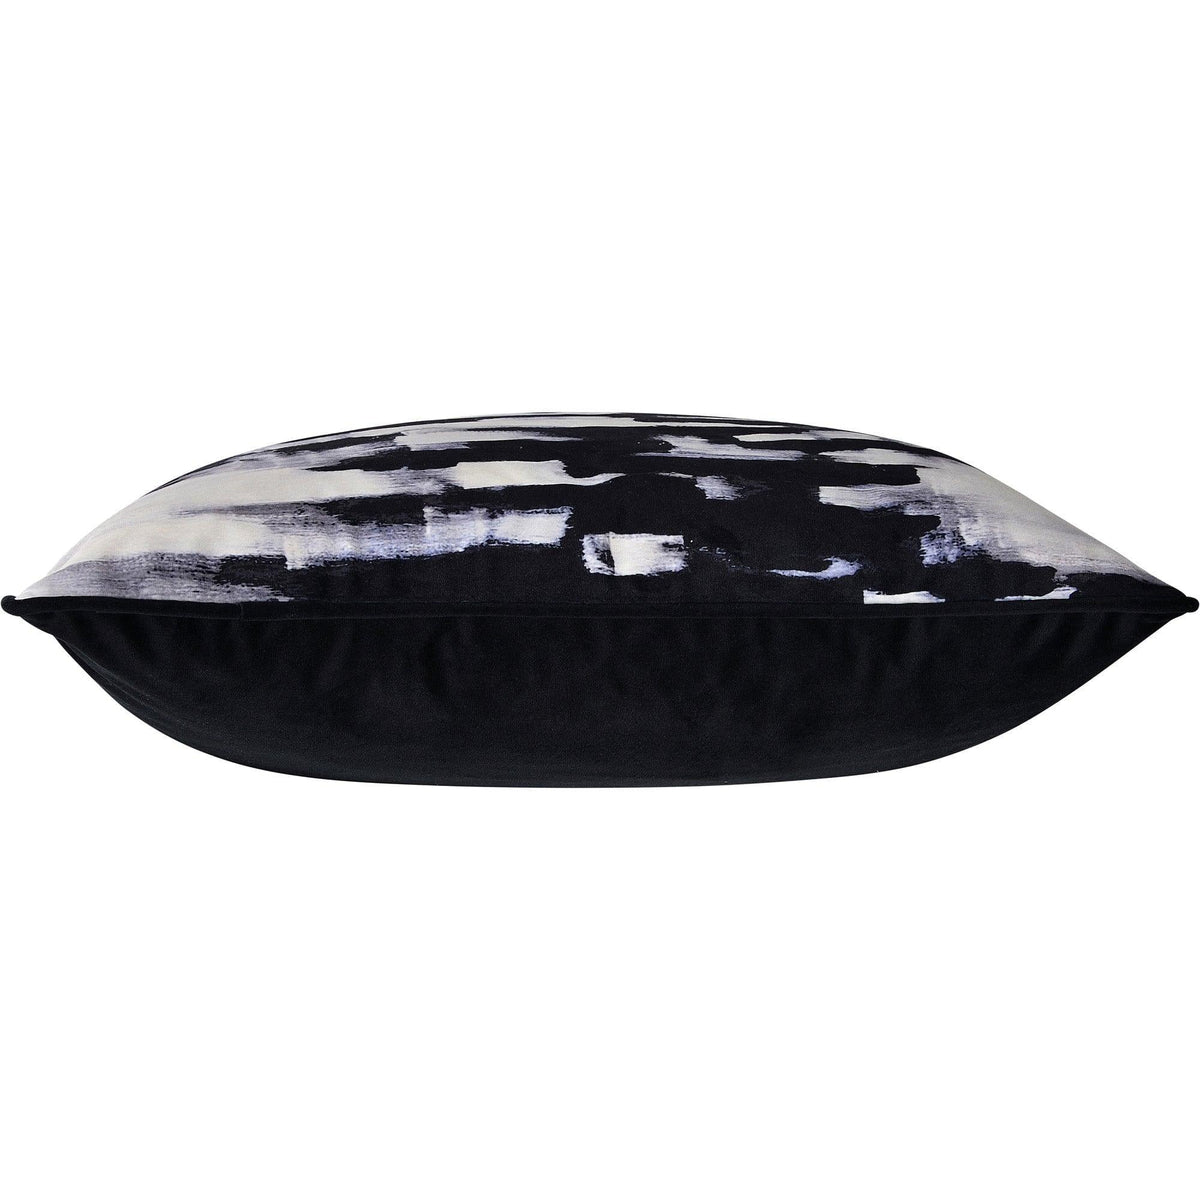 Montreal Lighting & Hardware - Markat Pillow by Renwil - Montreal Lighting & Hardware